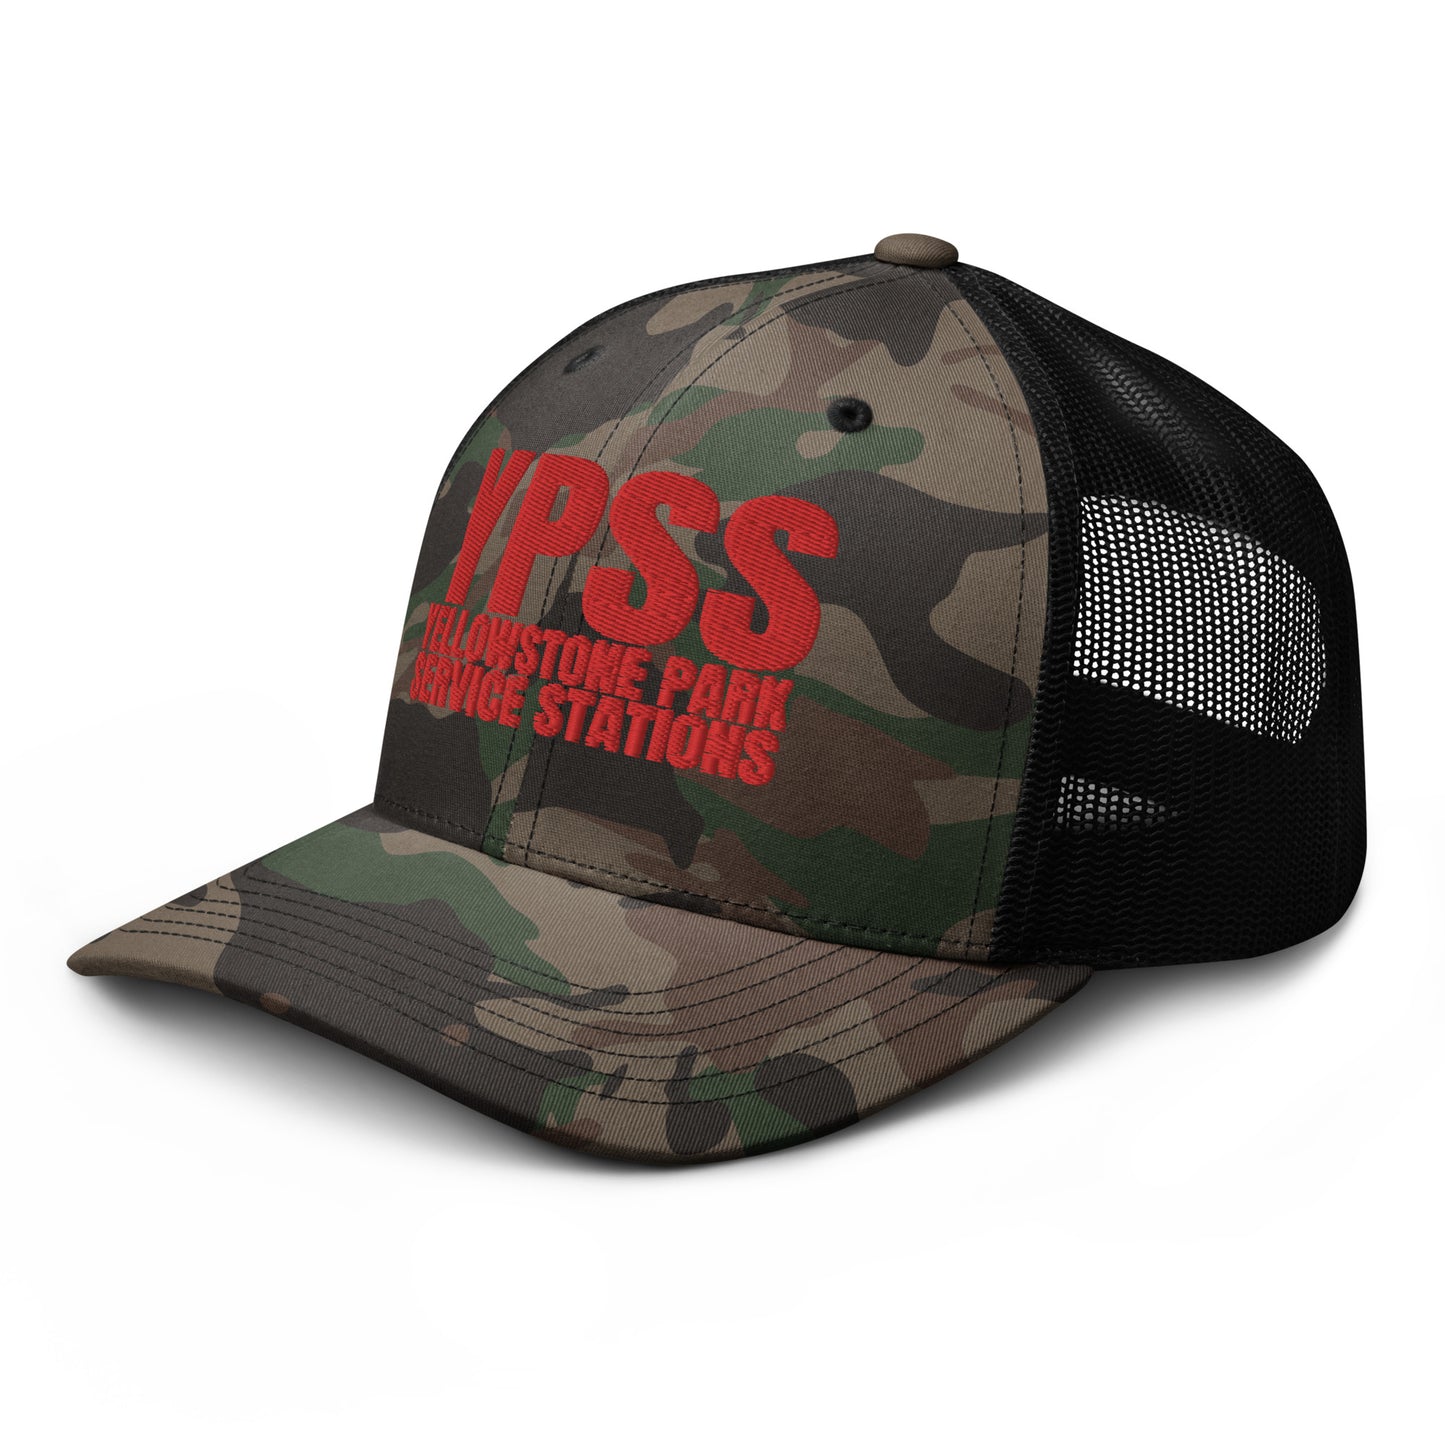 YPSS | Yellowstone Park Service Stations Camouflage trucker hat